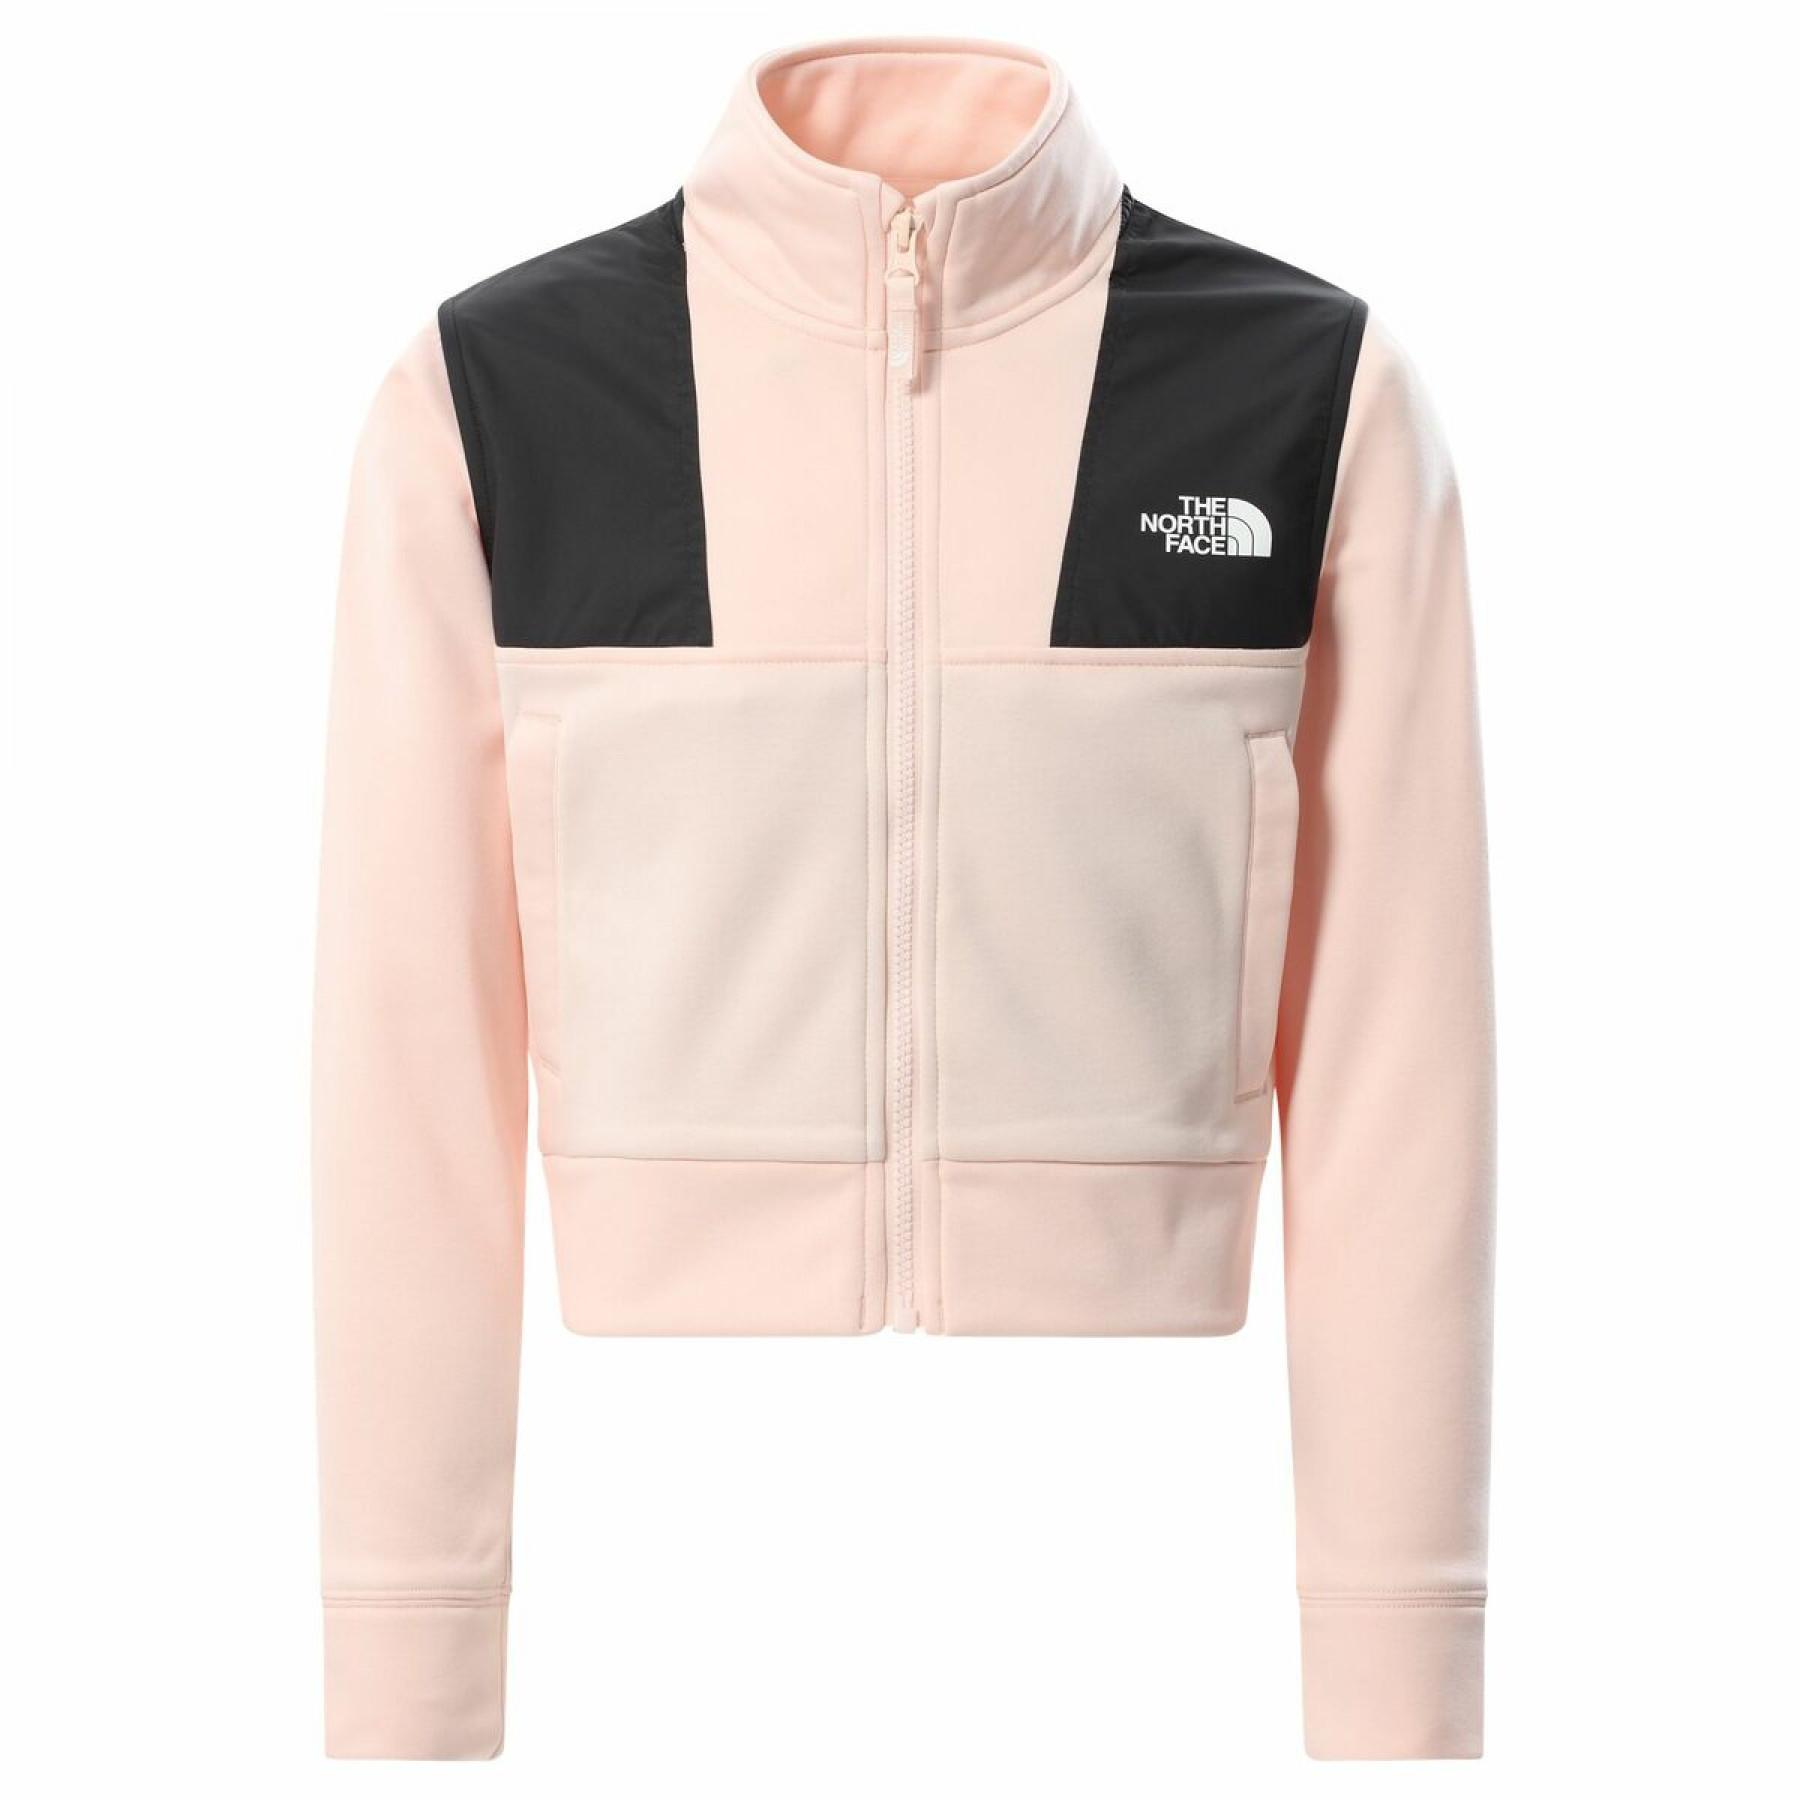 Fullzip sweat jacket The North Face Surgent